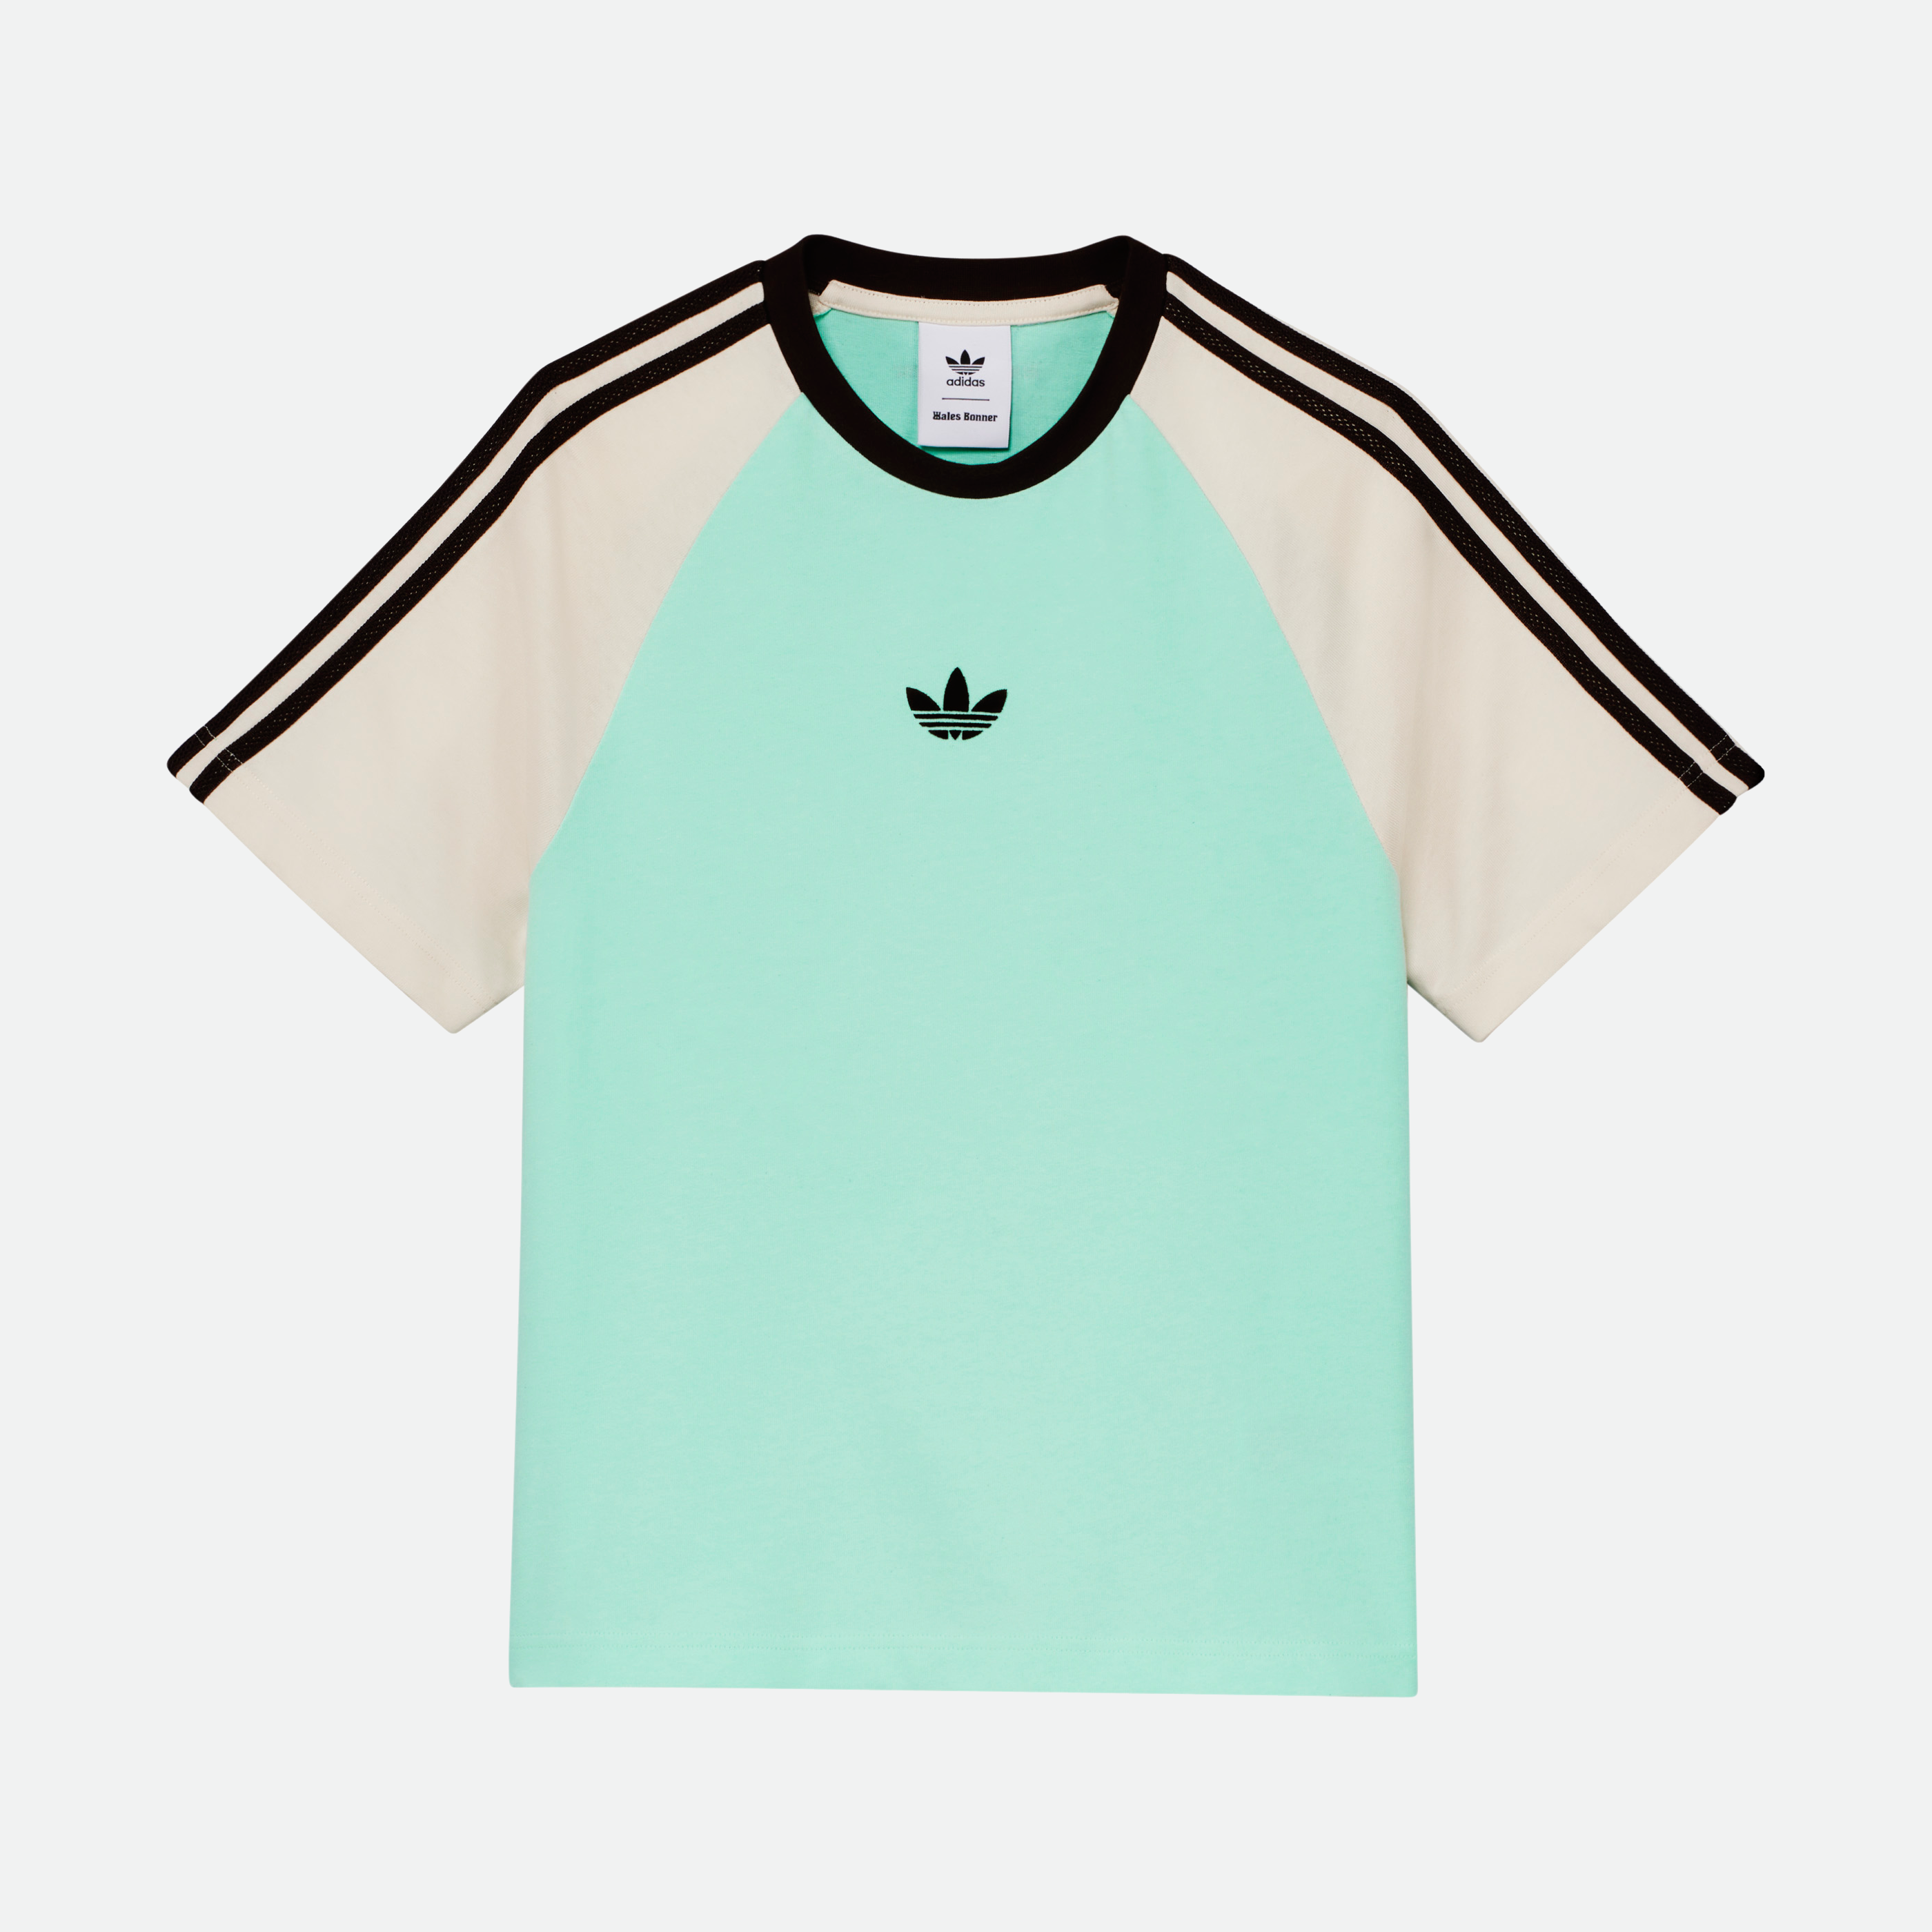 WALES BONNER x ADIDAS S/S TEE "CLEAR MINT"